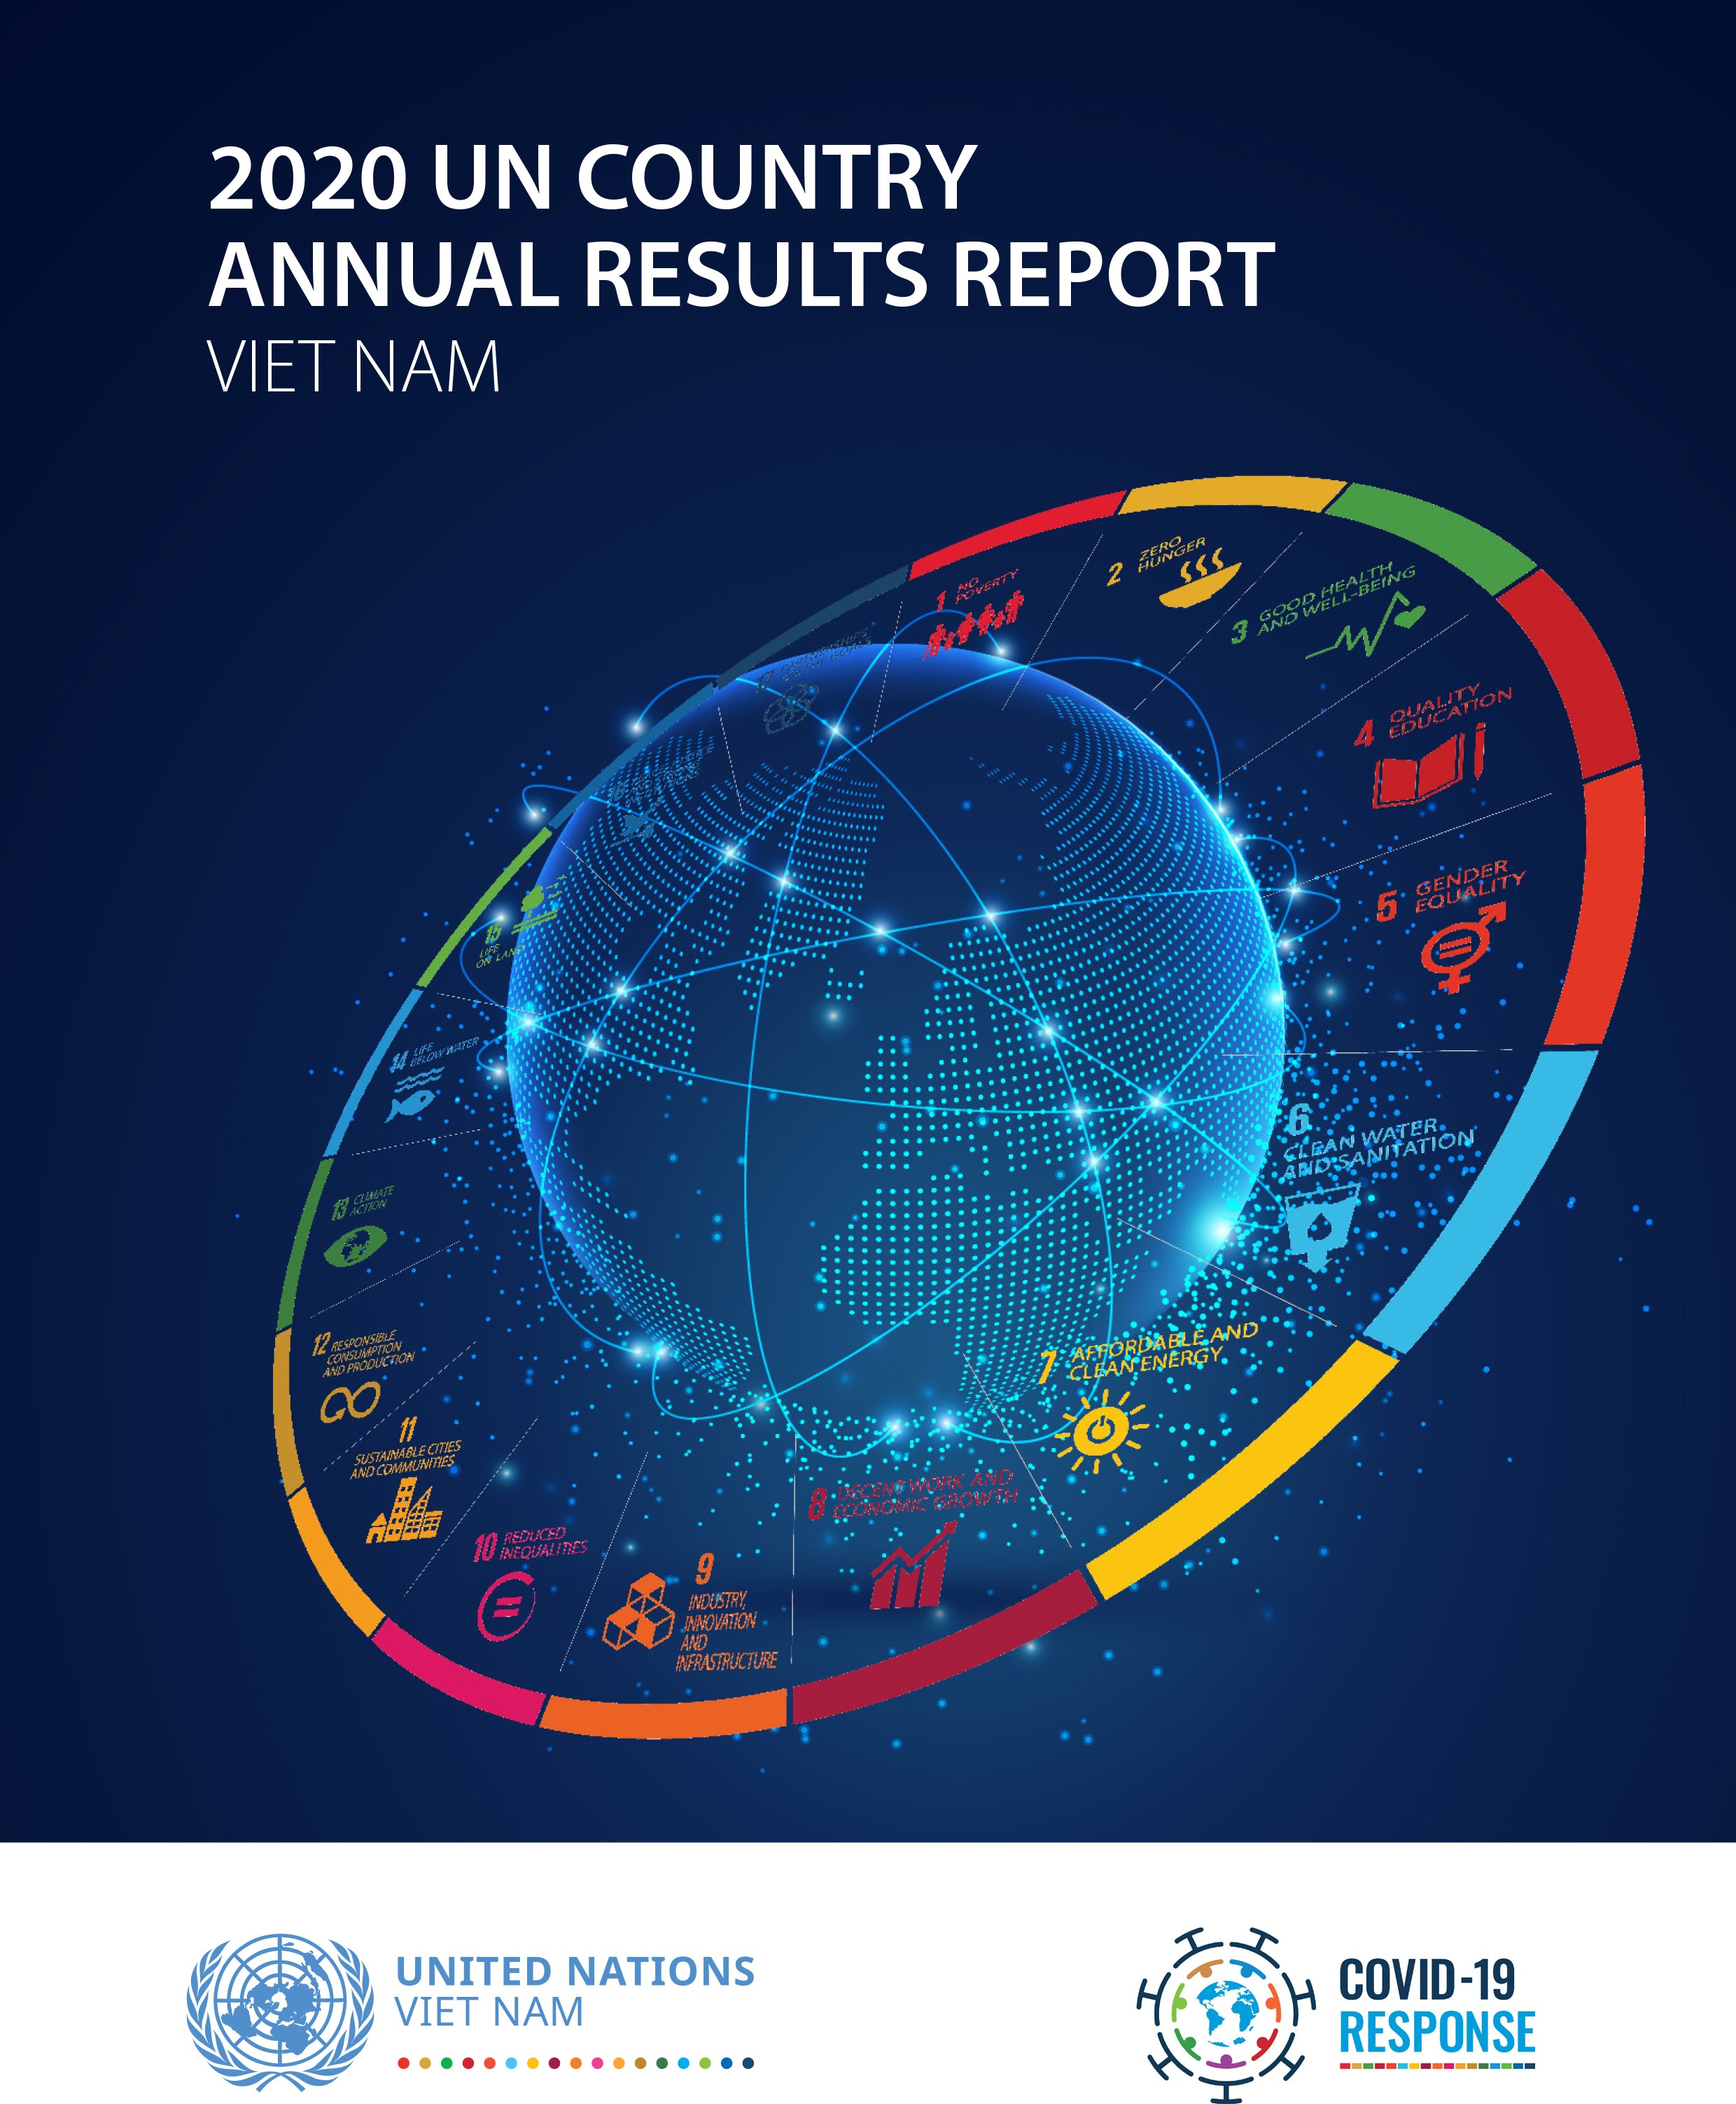 2020 UN COUNTRY ANNUAL RESULTS REPORT VIET NAM